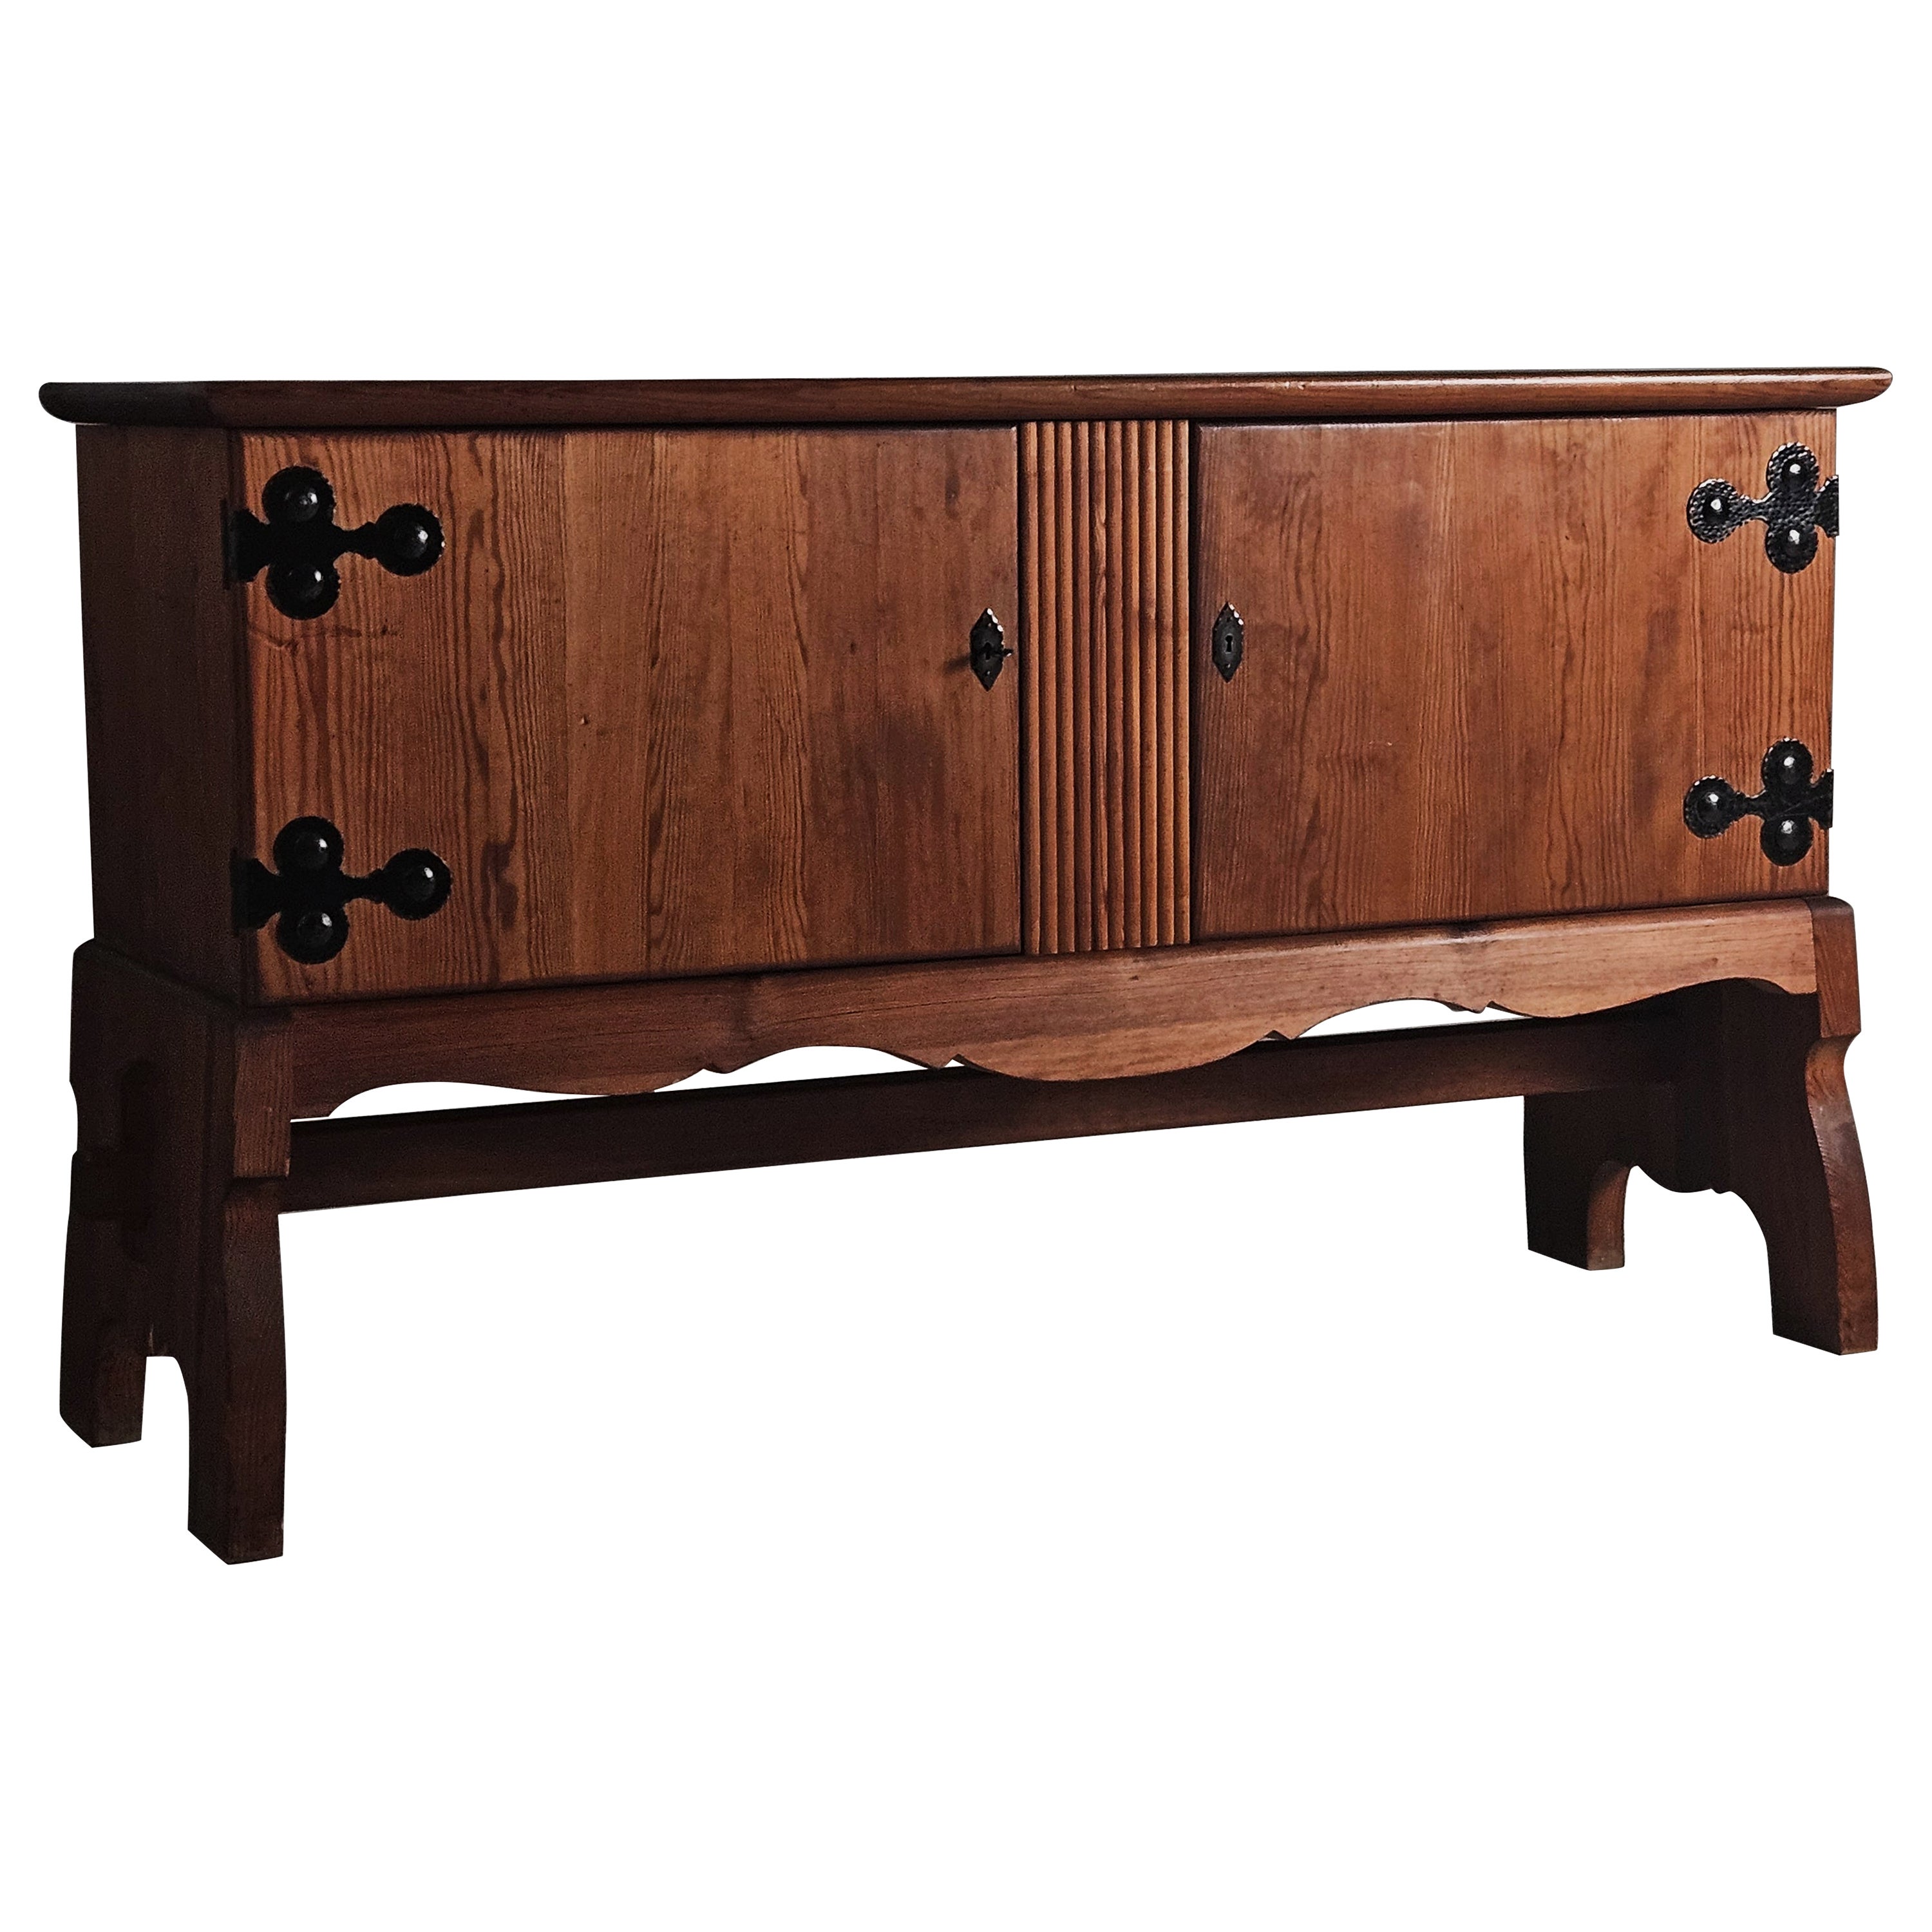 Pine and iron sideboard by Åby Möbelfabrik, Sweden, 1940s